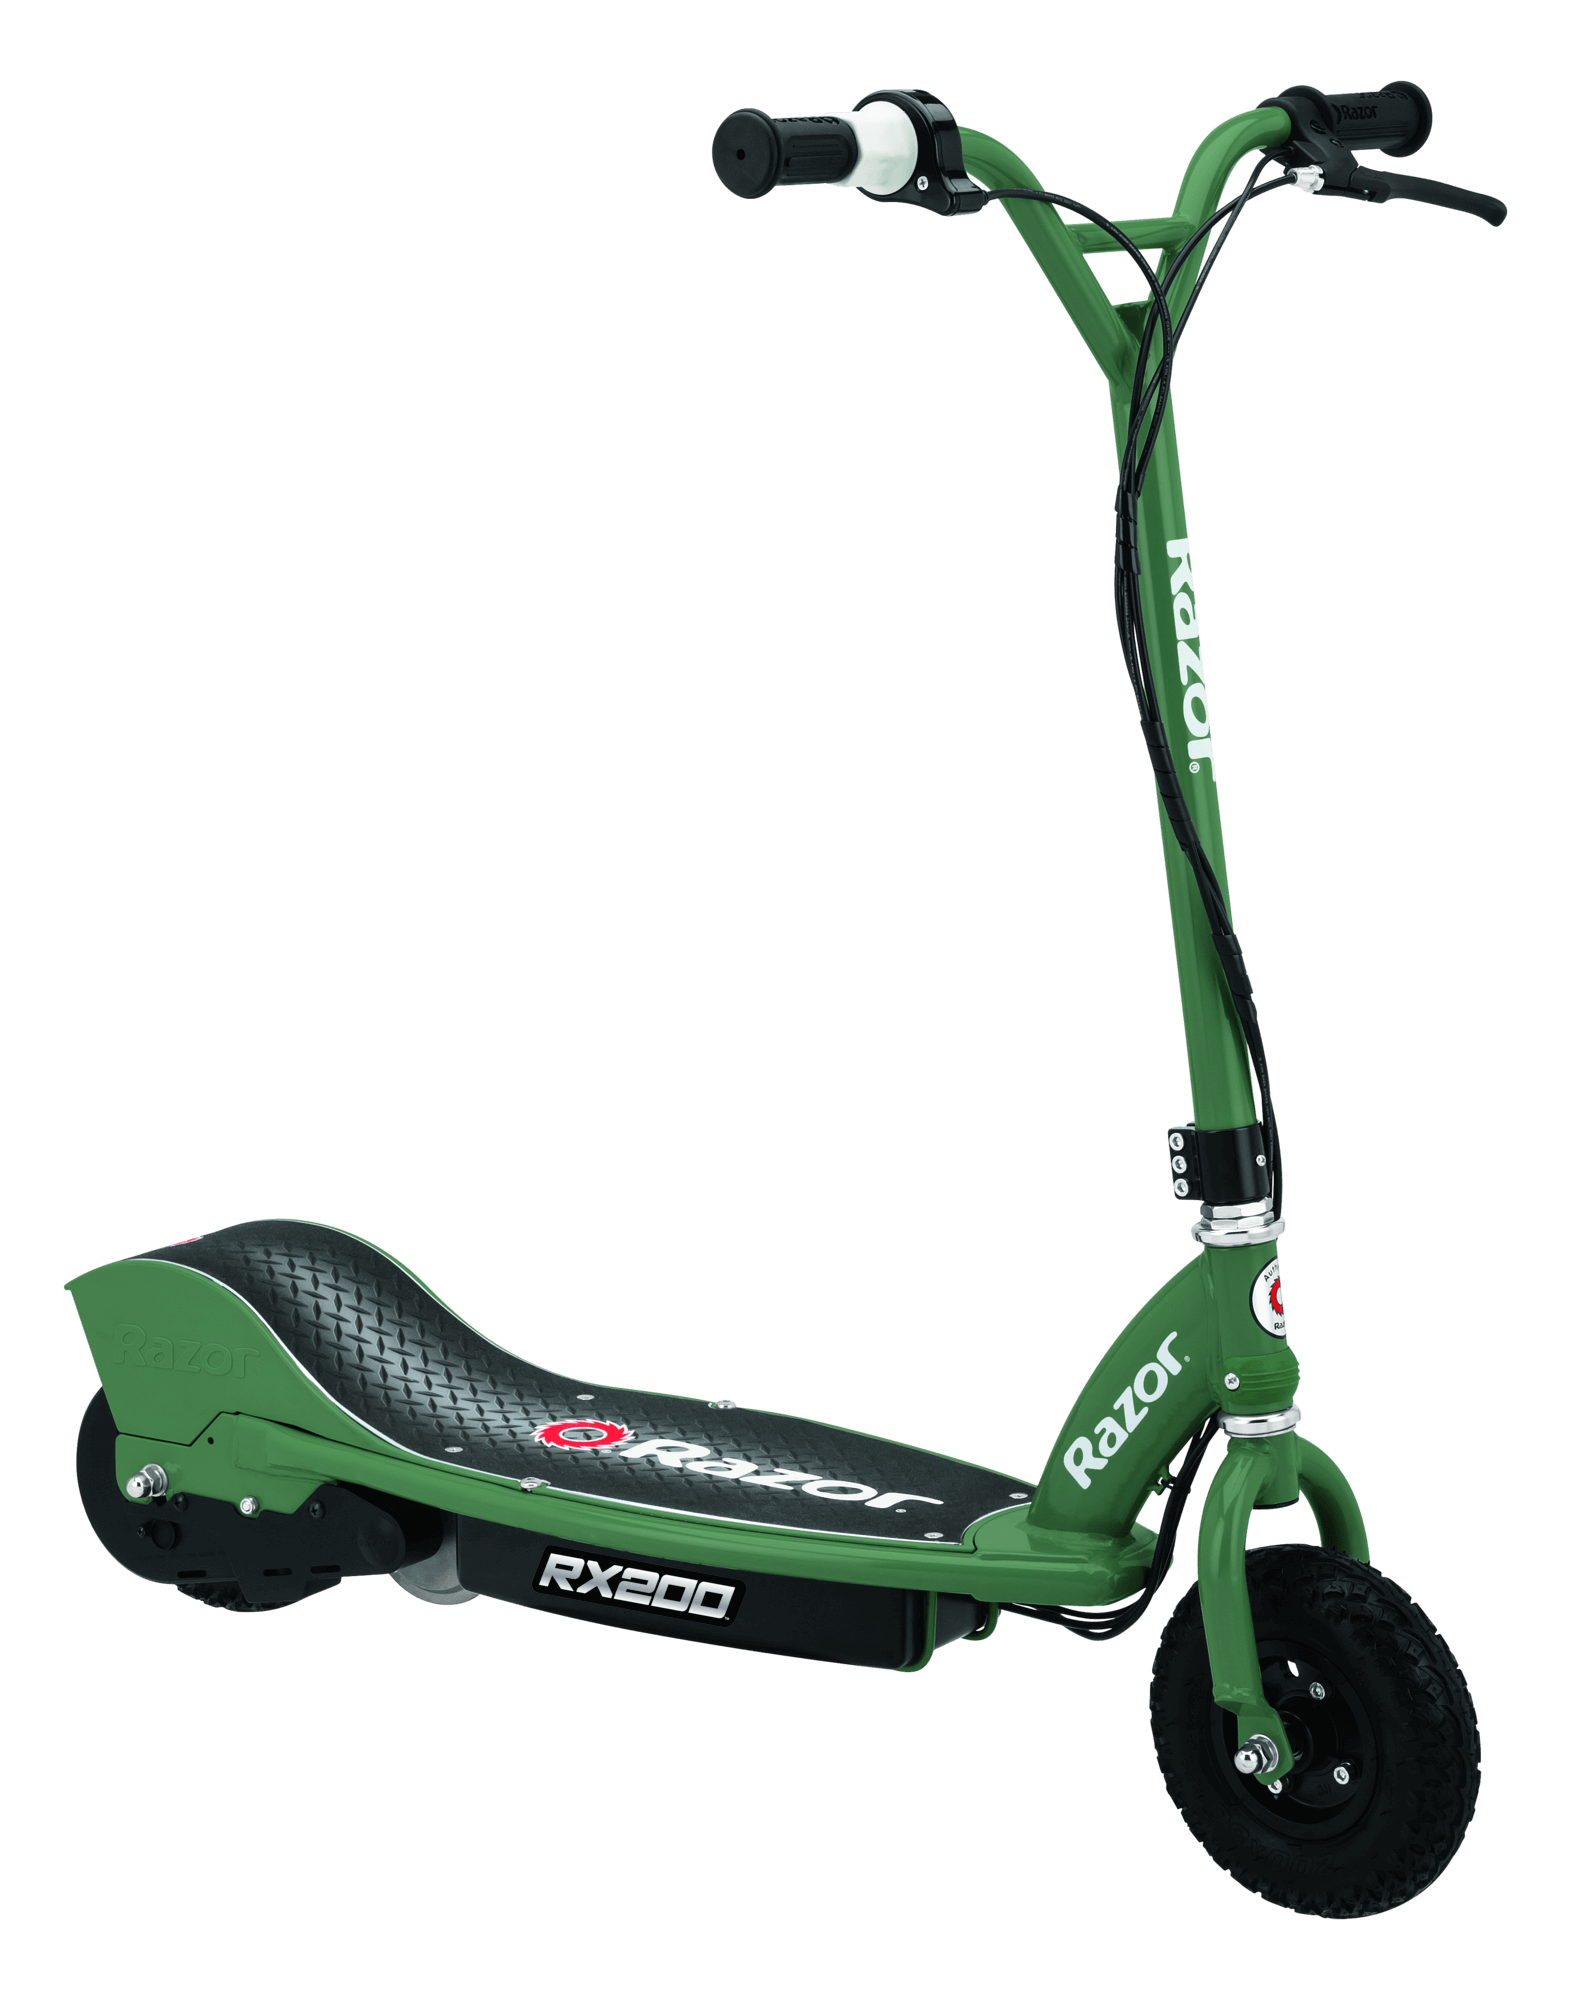 RX200 Electric Scooter - Razor
